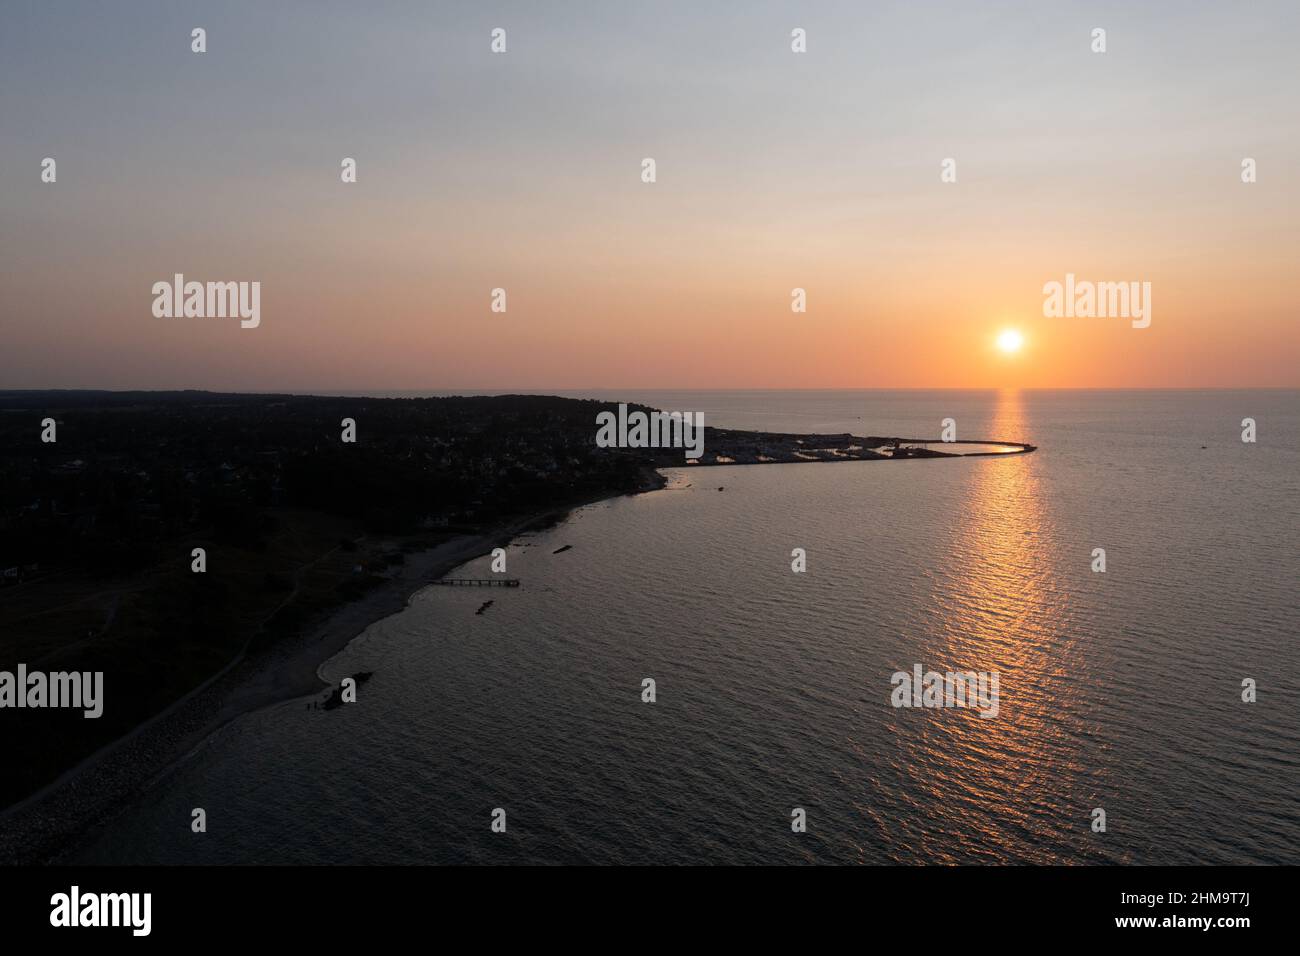 Gilleleje Harbour Sunset View Stock Photo